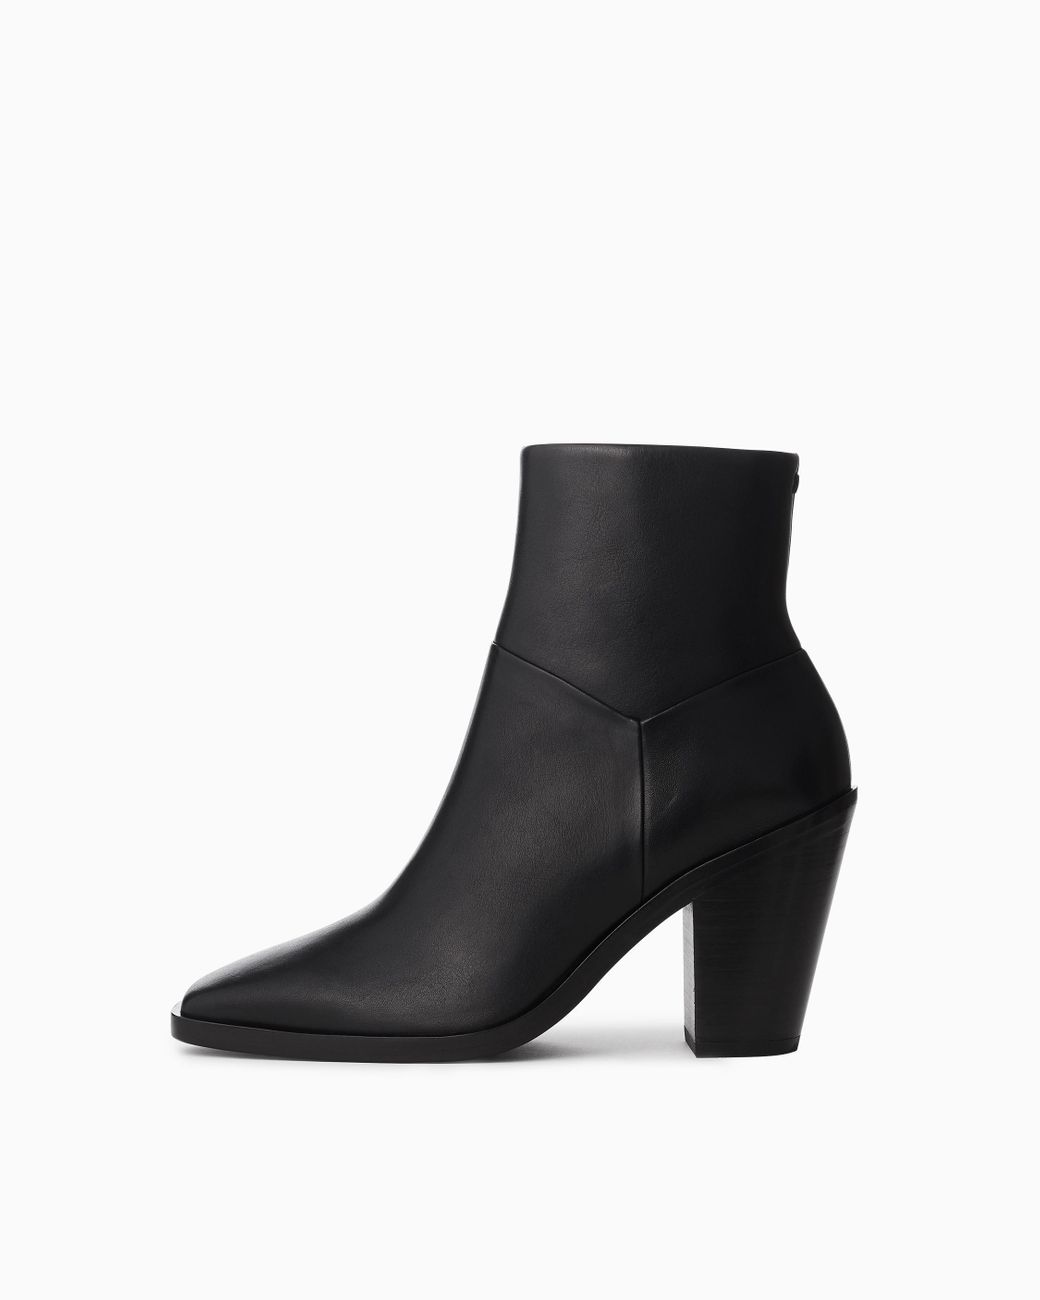 Rag & Bone Axel Zip Up Boot - Leather Ankle Boot in Black - Lyst